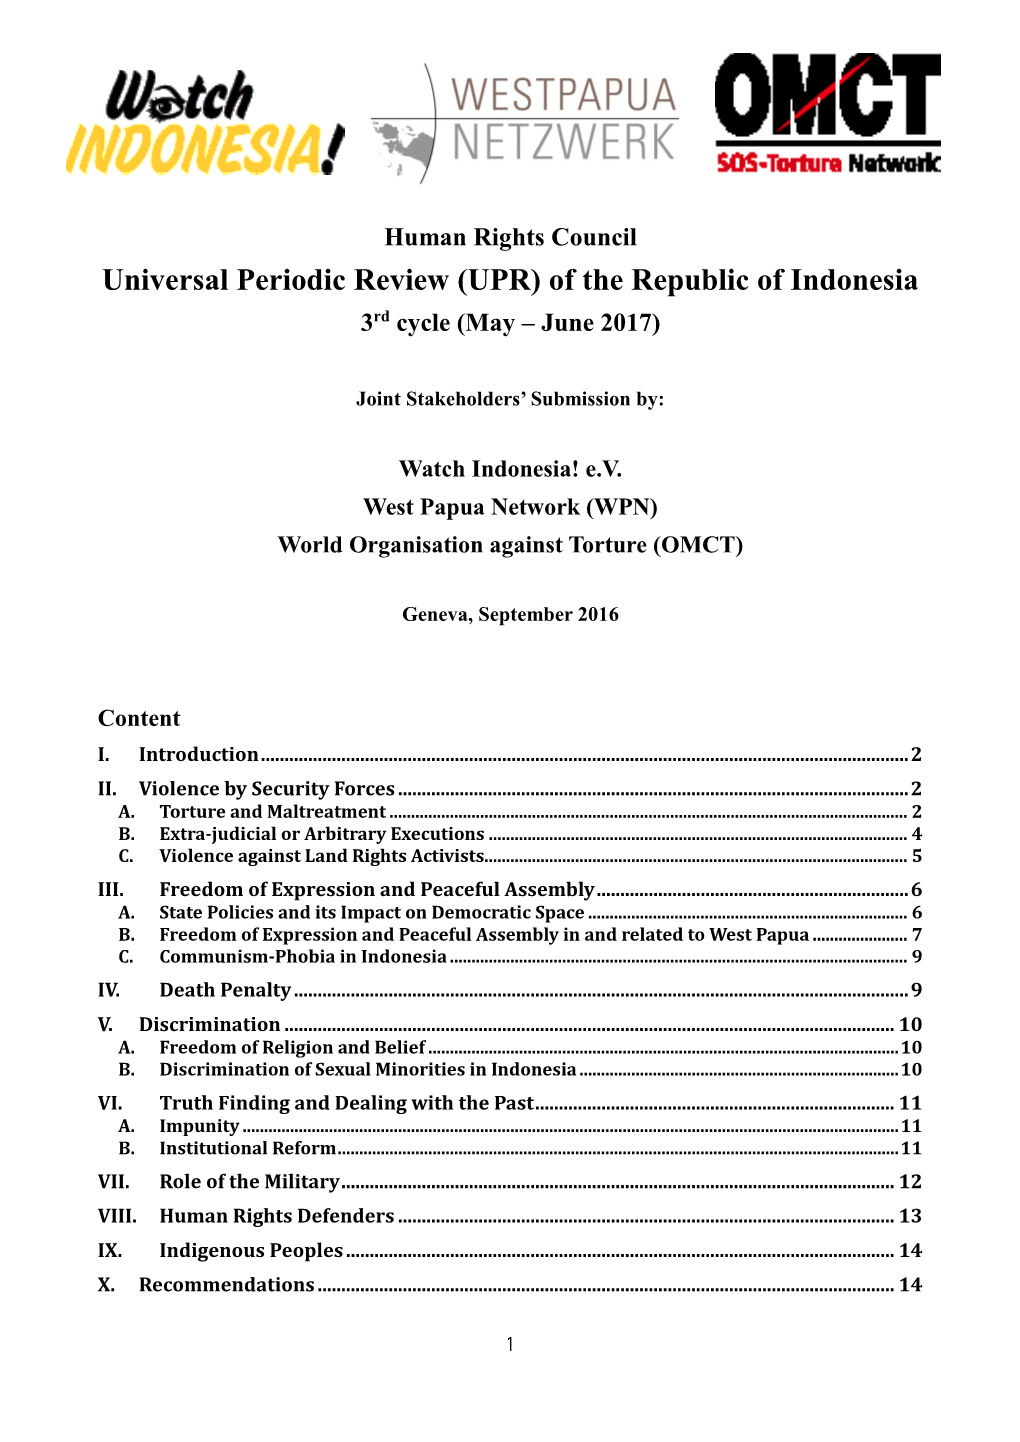 Universal Periodic Review (UPR) of the Republic of Indonesia 3Rd Cycle (May – June 2017)